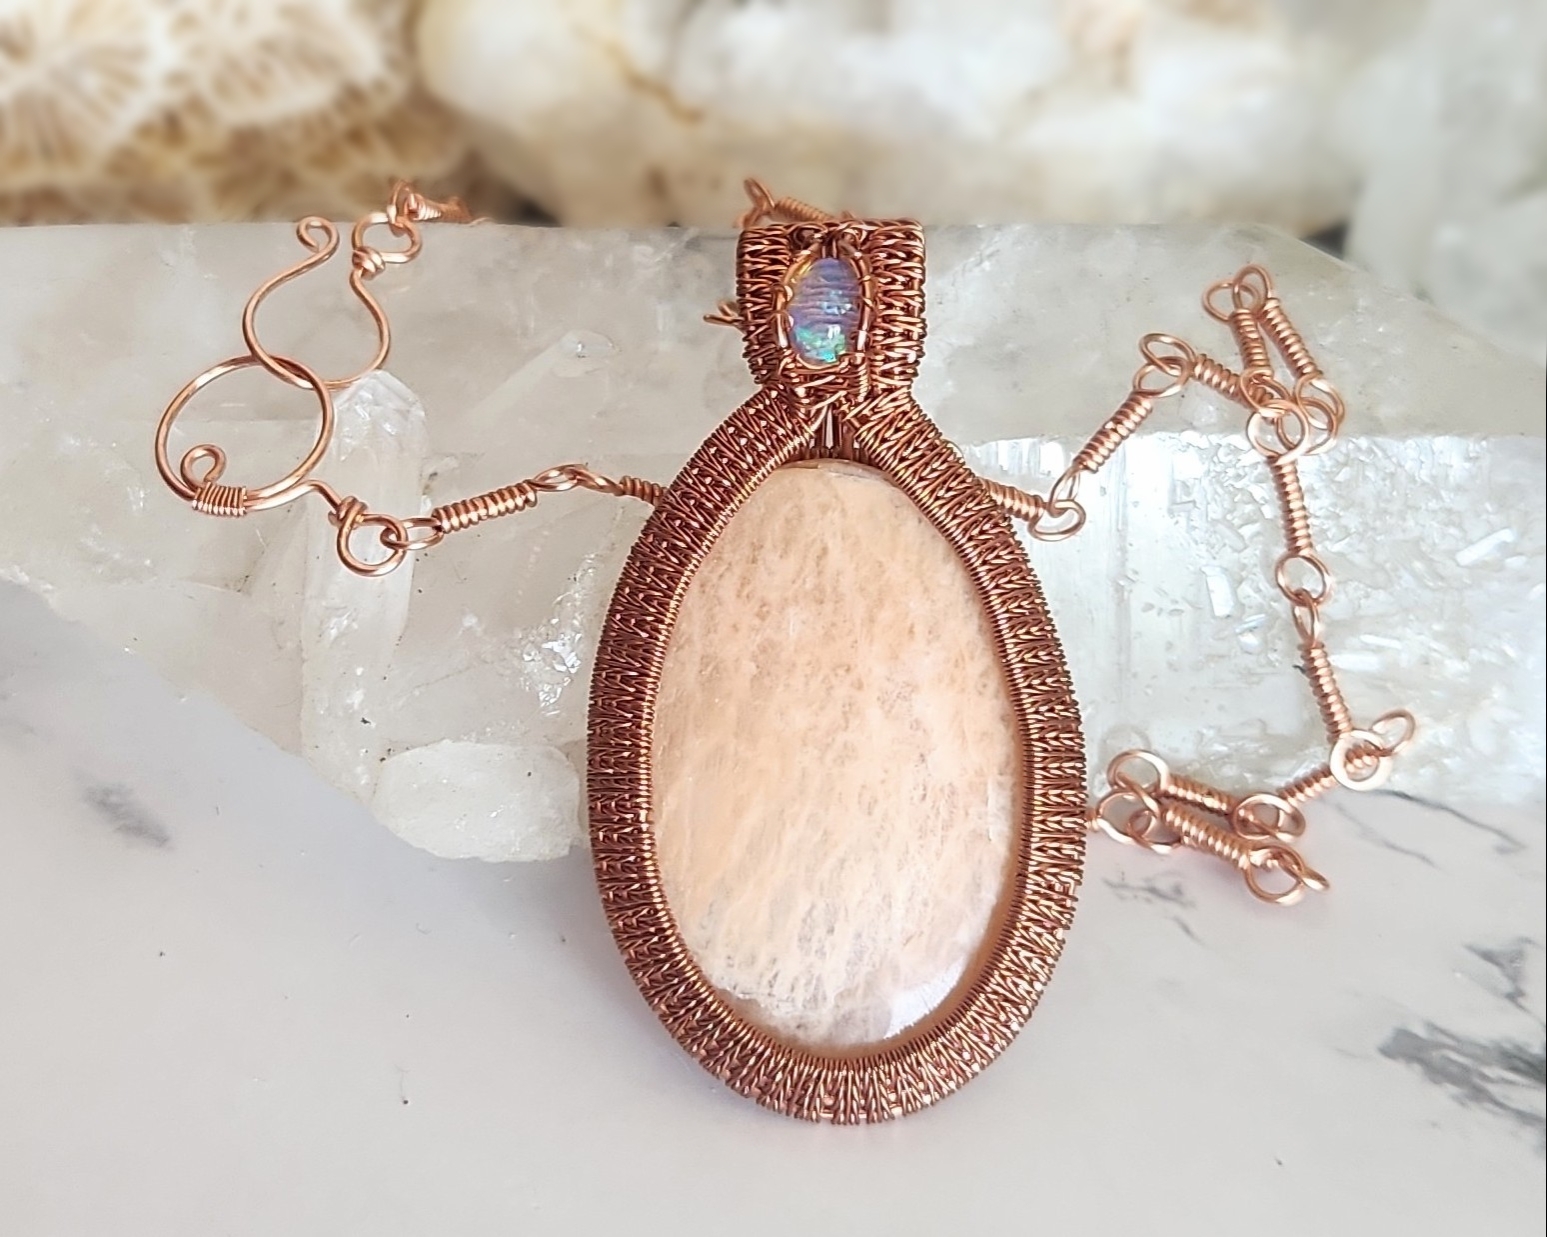 Acid etched copper necklace with apatite gemstones – Artisan Jewelry by  Erica Gooding